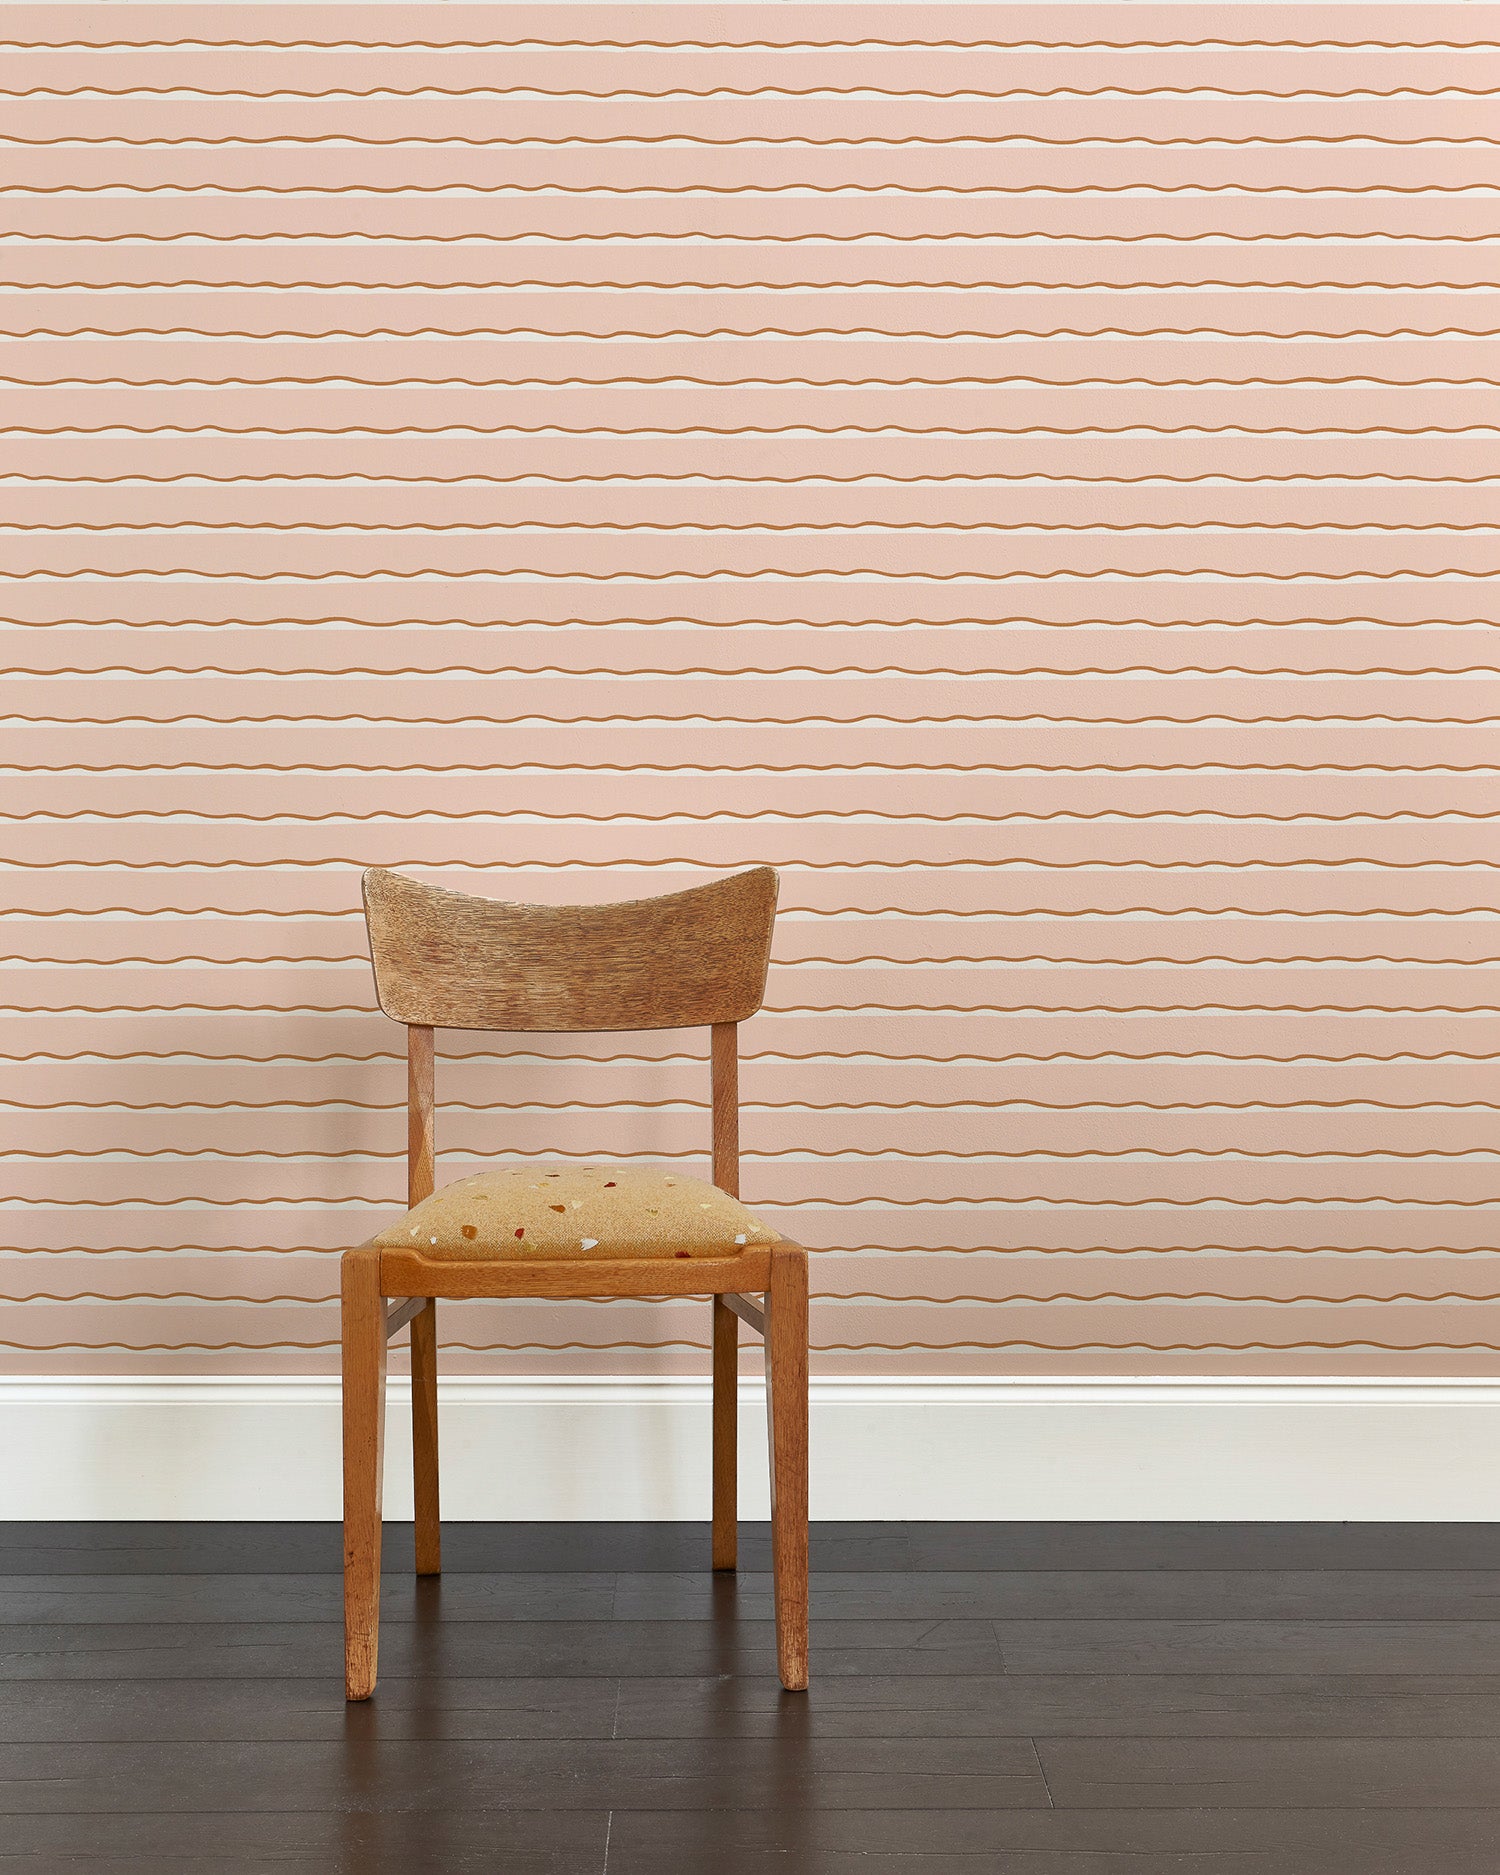 A wooden chair stands in front of a wall papered in an undulating stripe pattern in pink, white and gold.